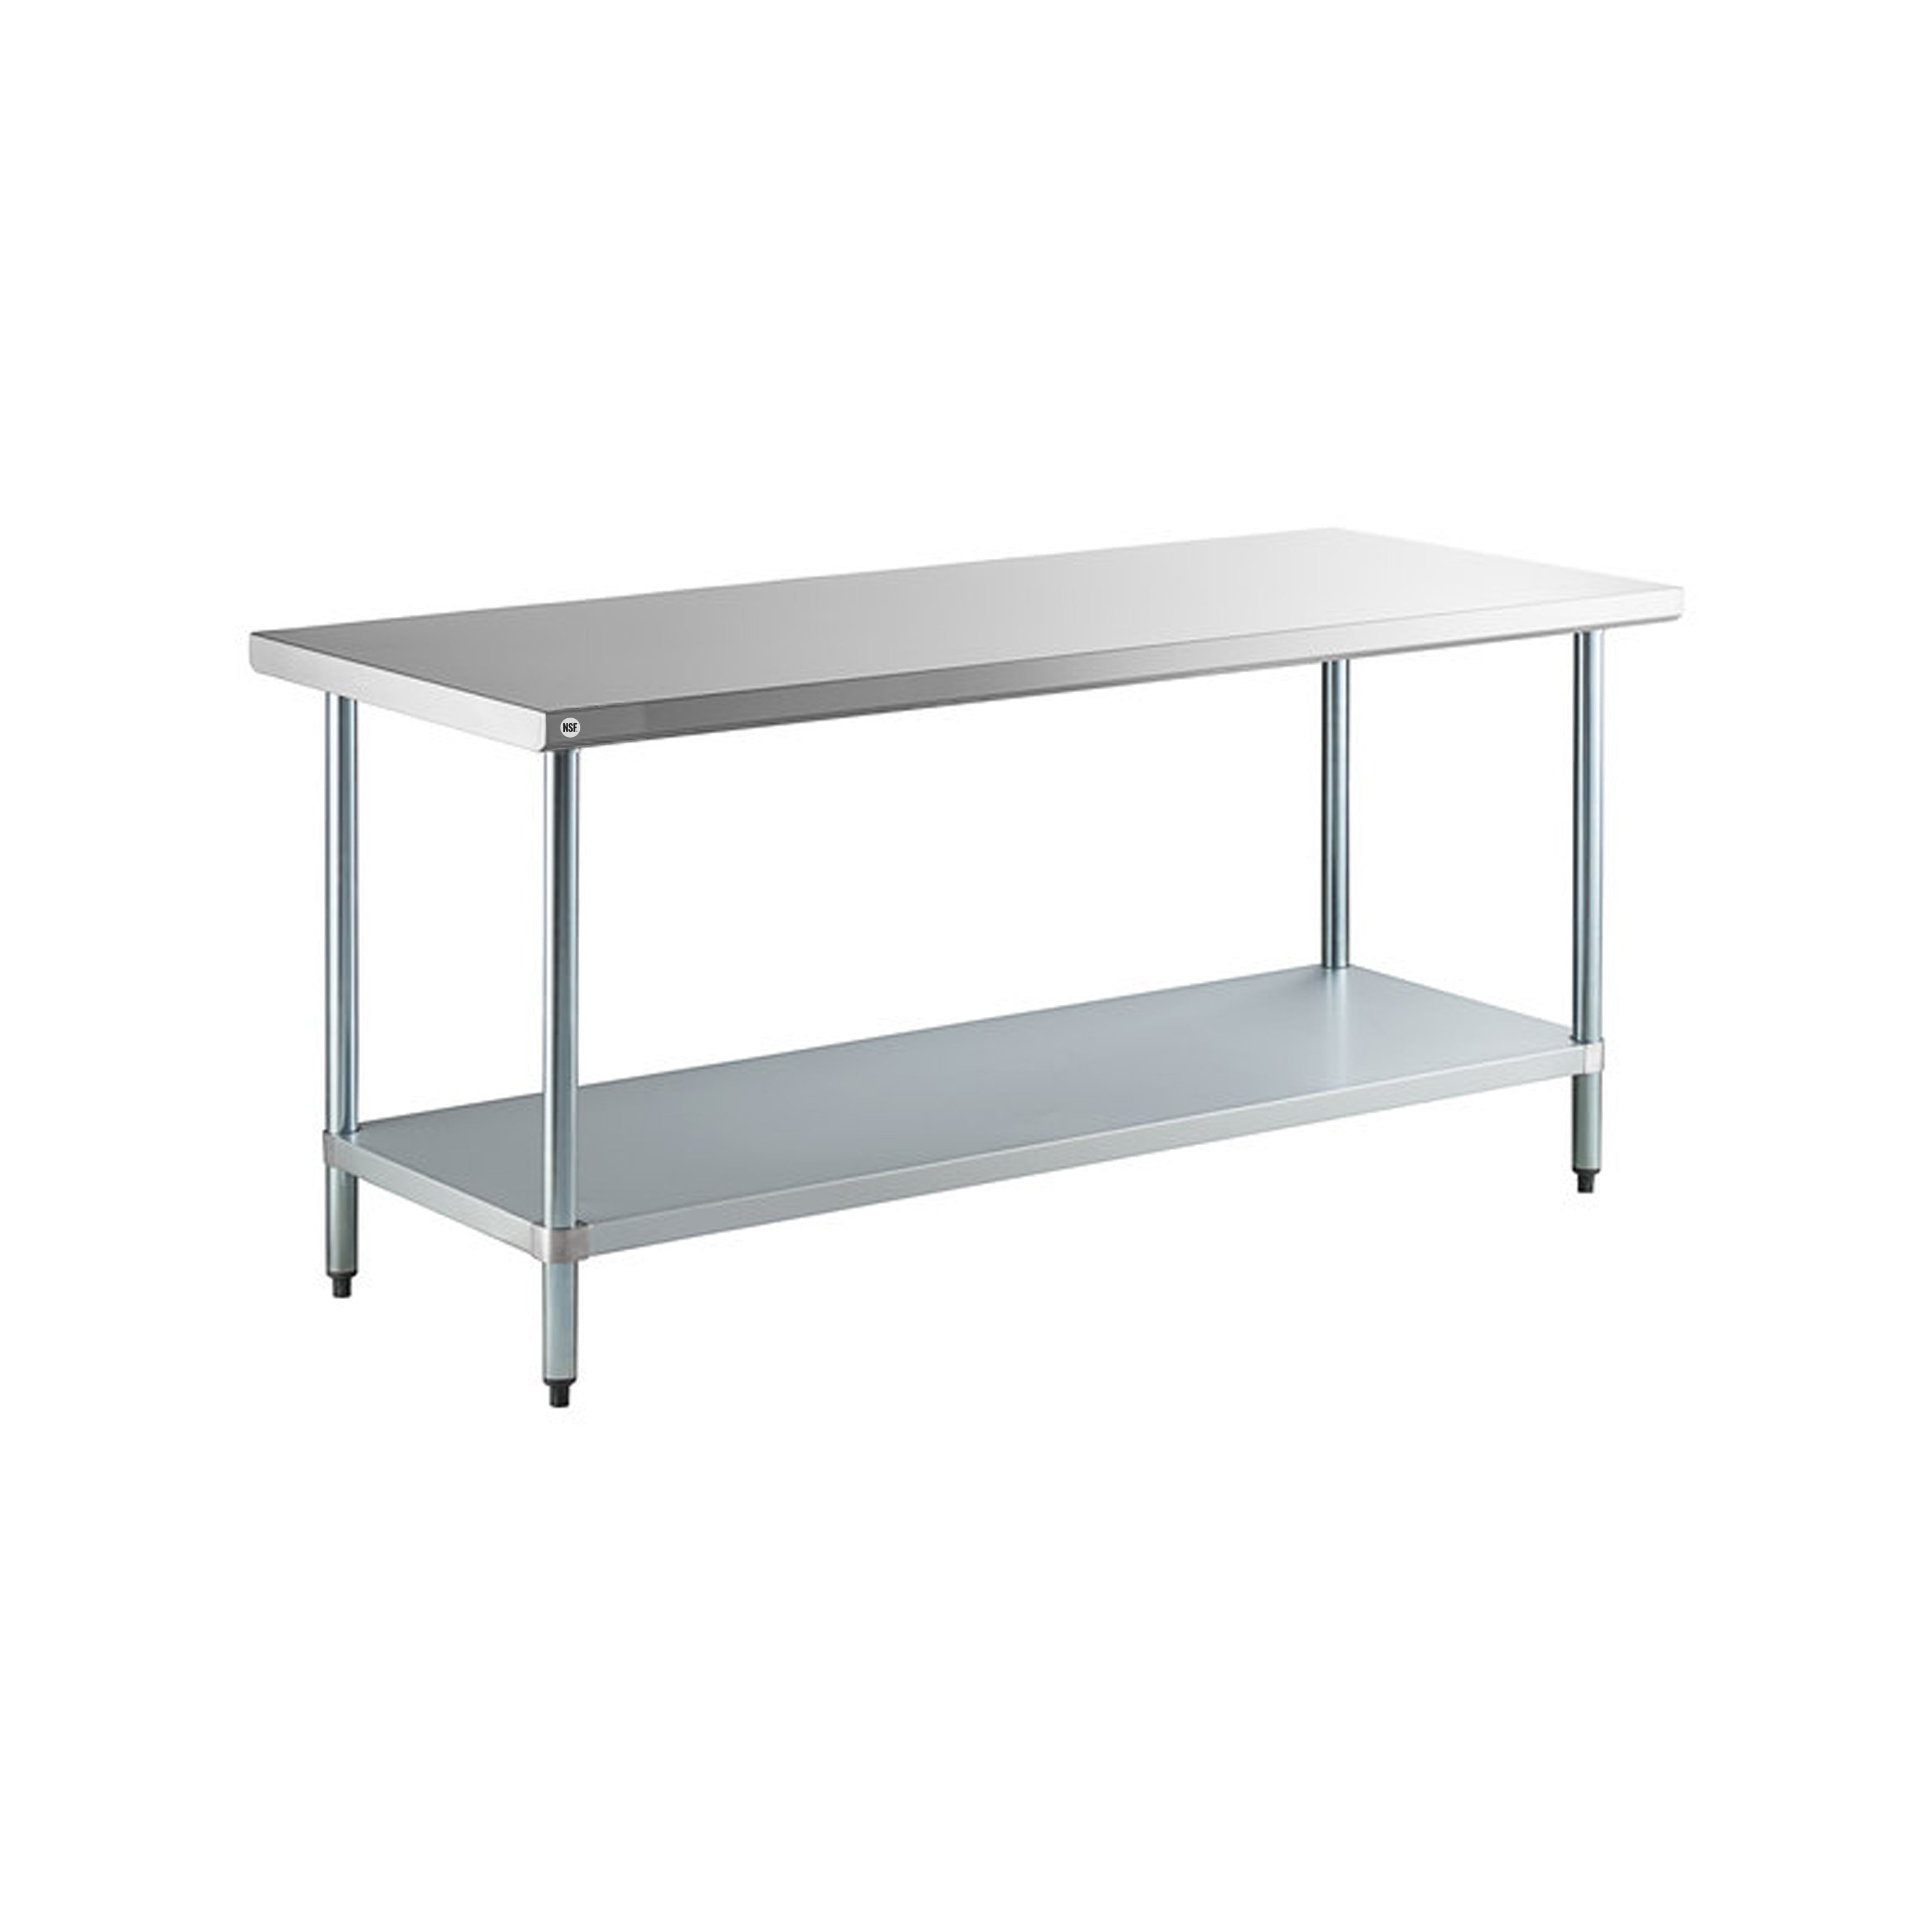 Omcan - 20434, Commercial 84" x 30" Stainless Steel Kitchen Work Table 1600lbs Medium Duty